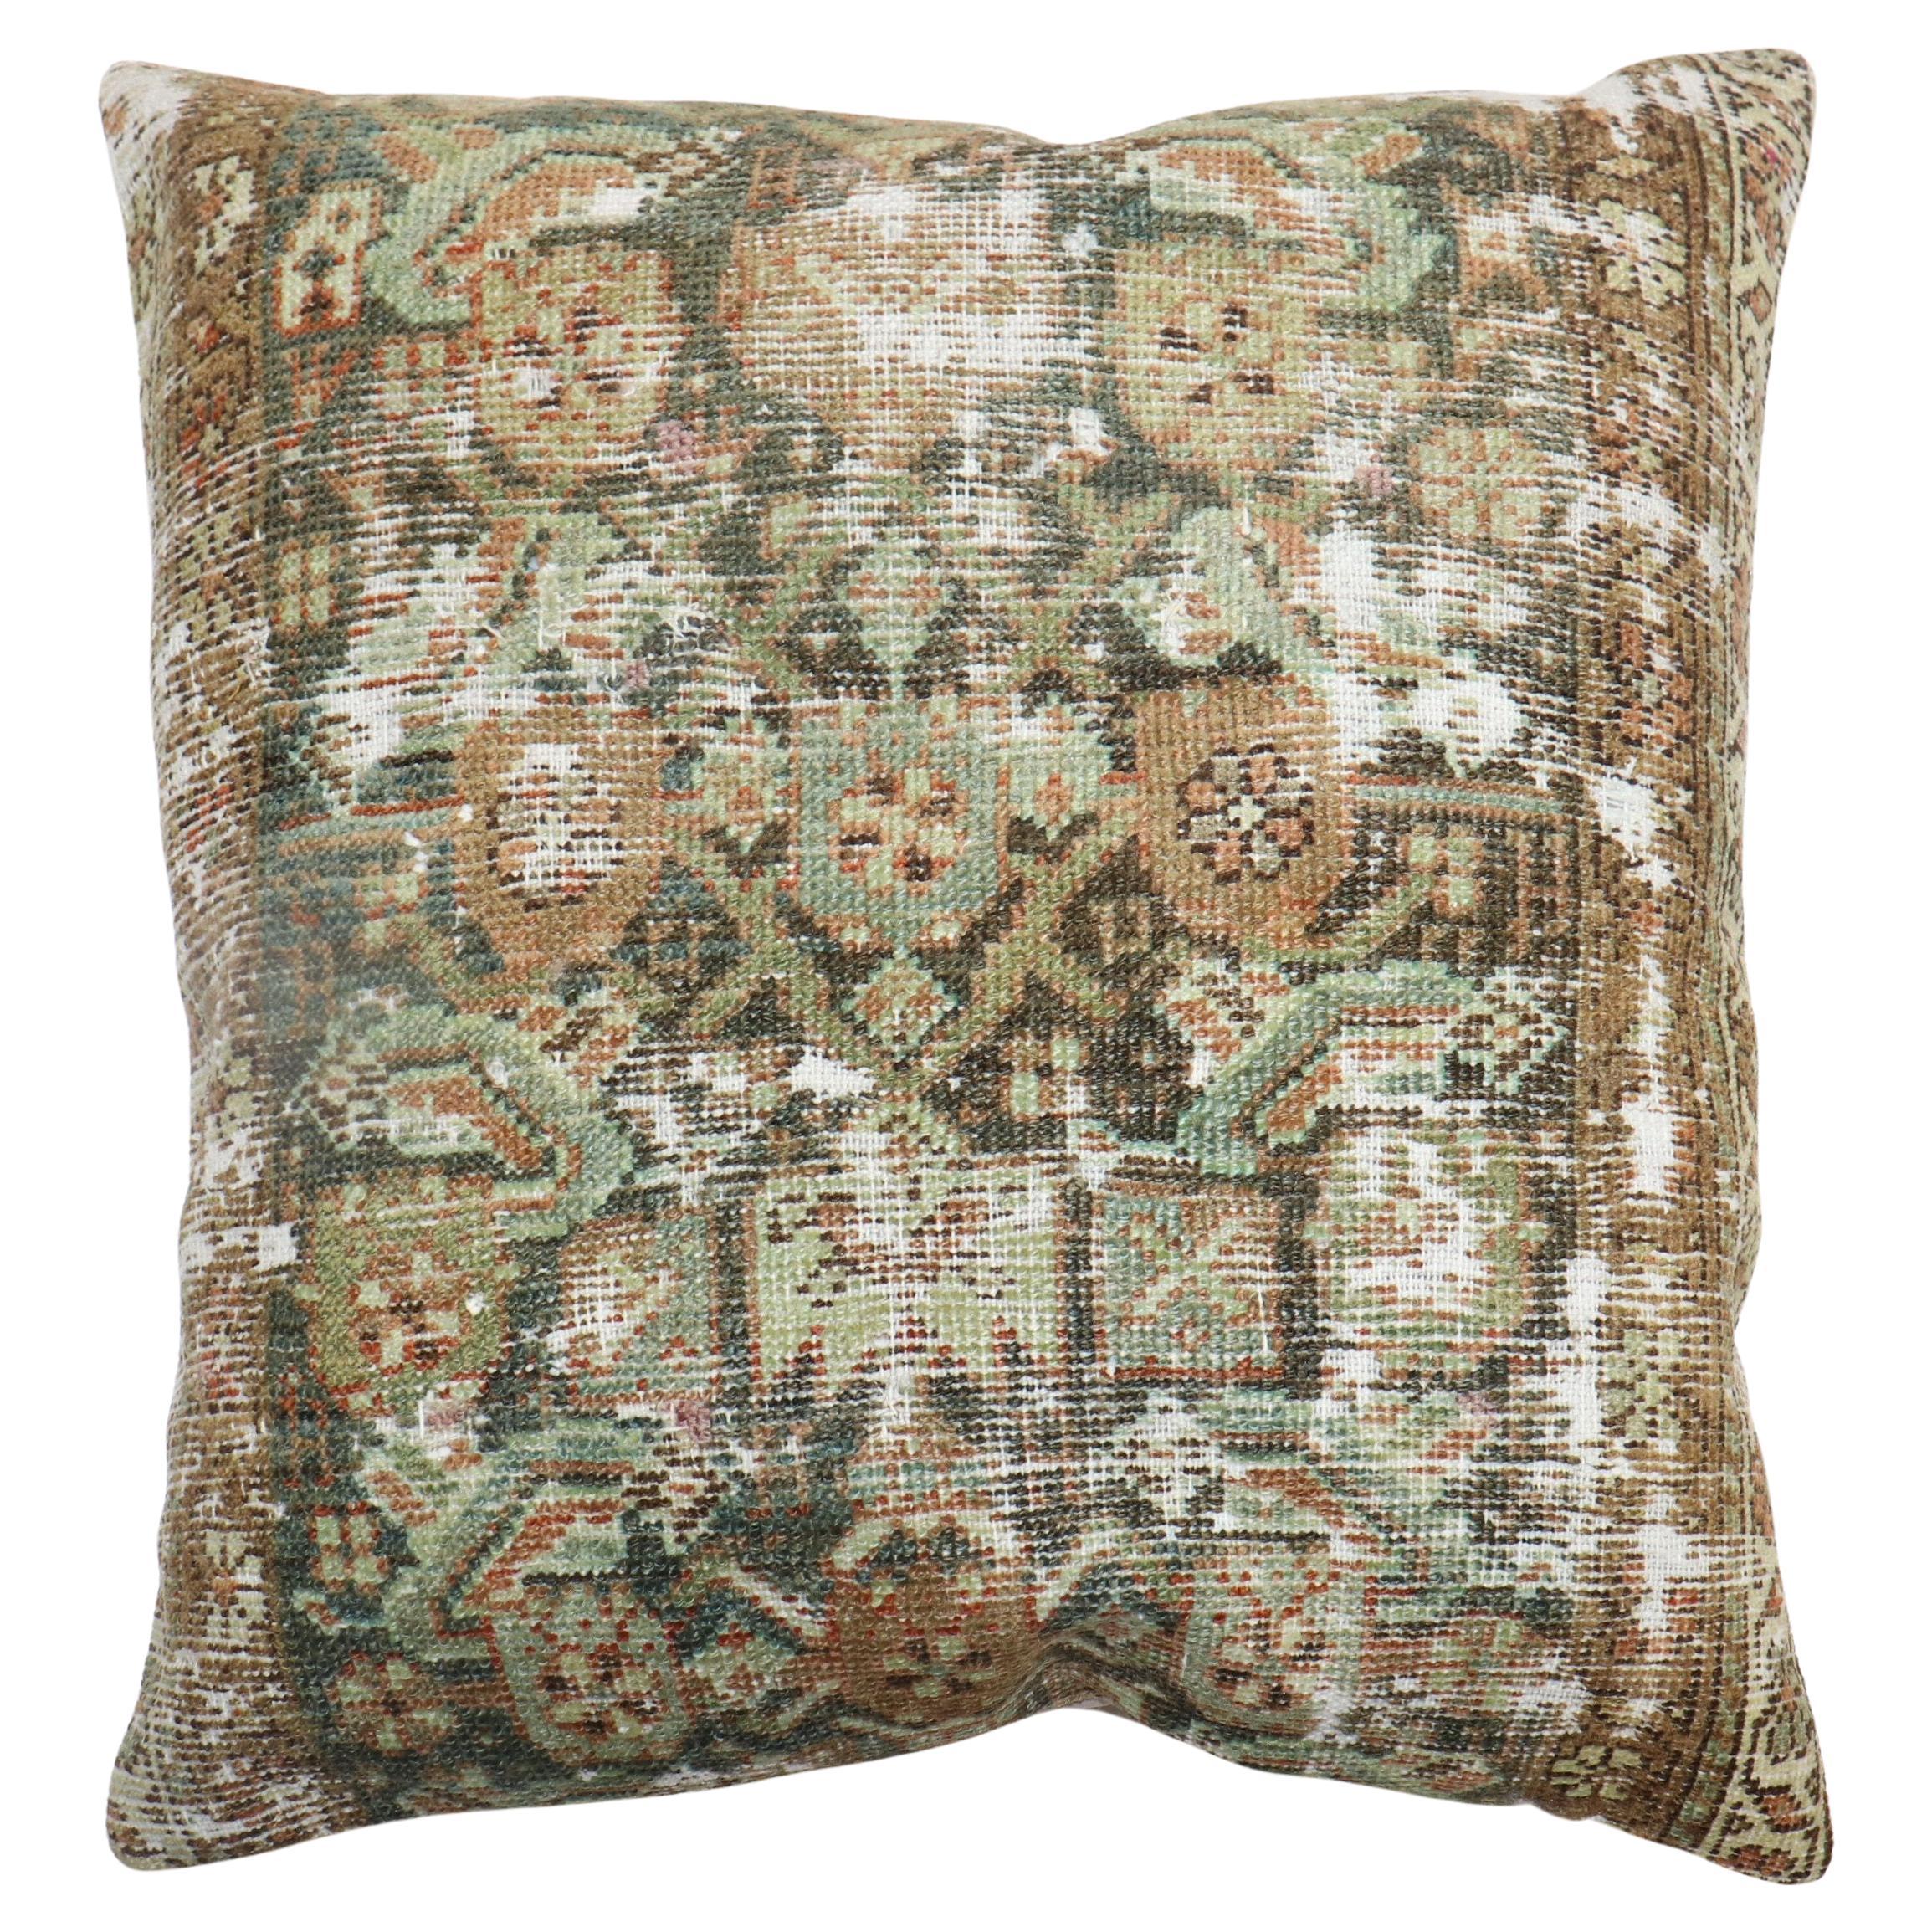 Zabihi Collection Large Square Worn Rug Pillow For Sale